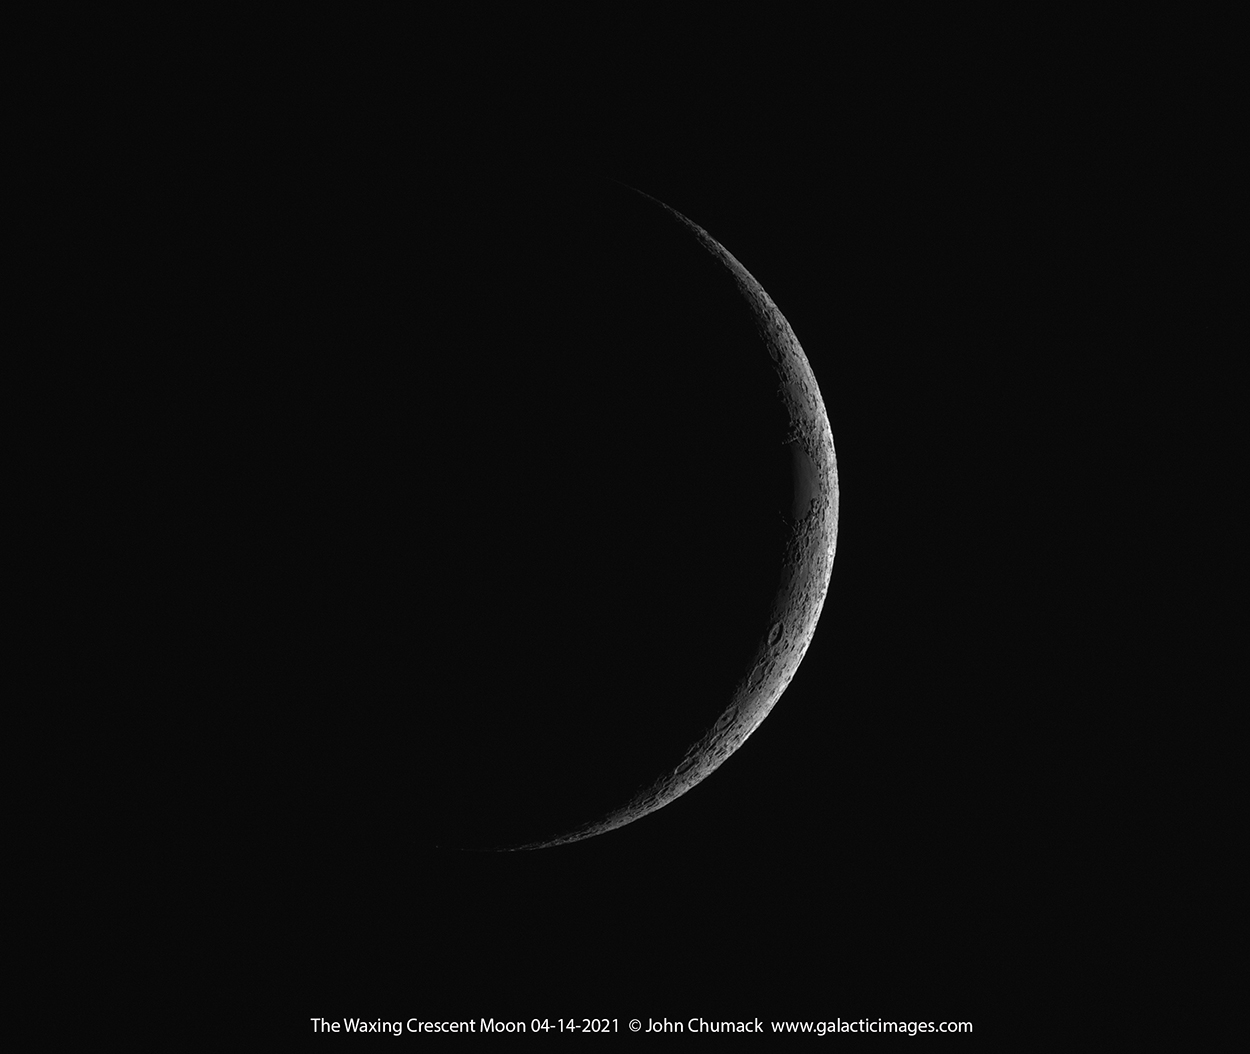 The Waxing Crescent Moon